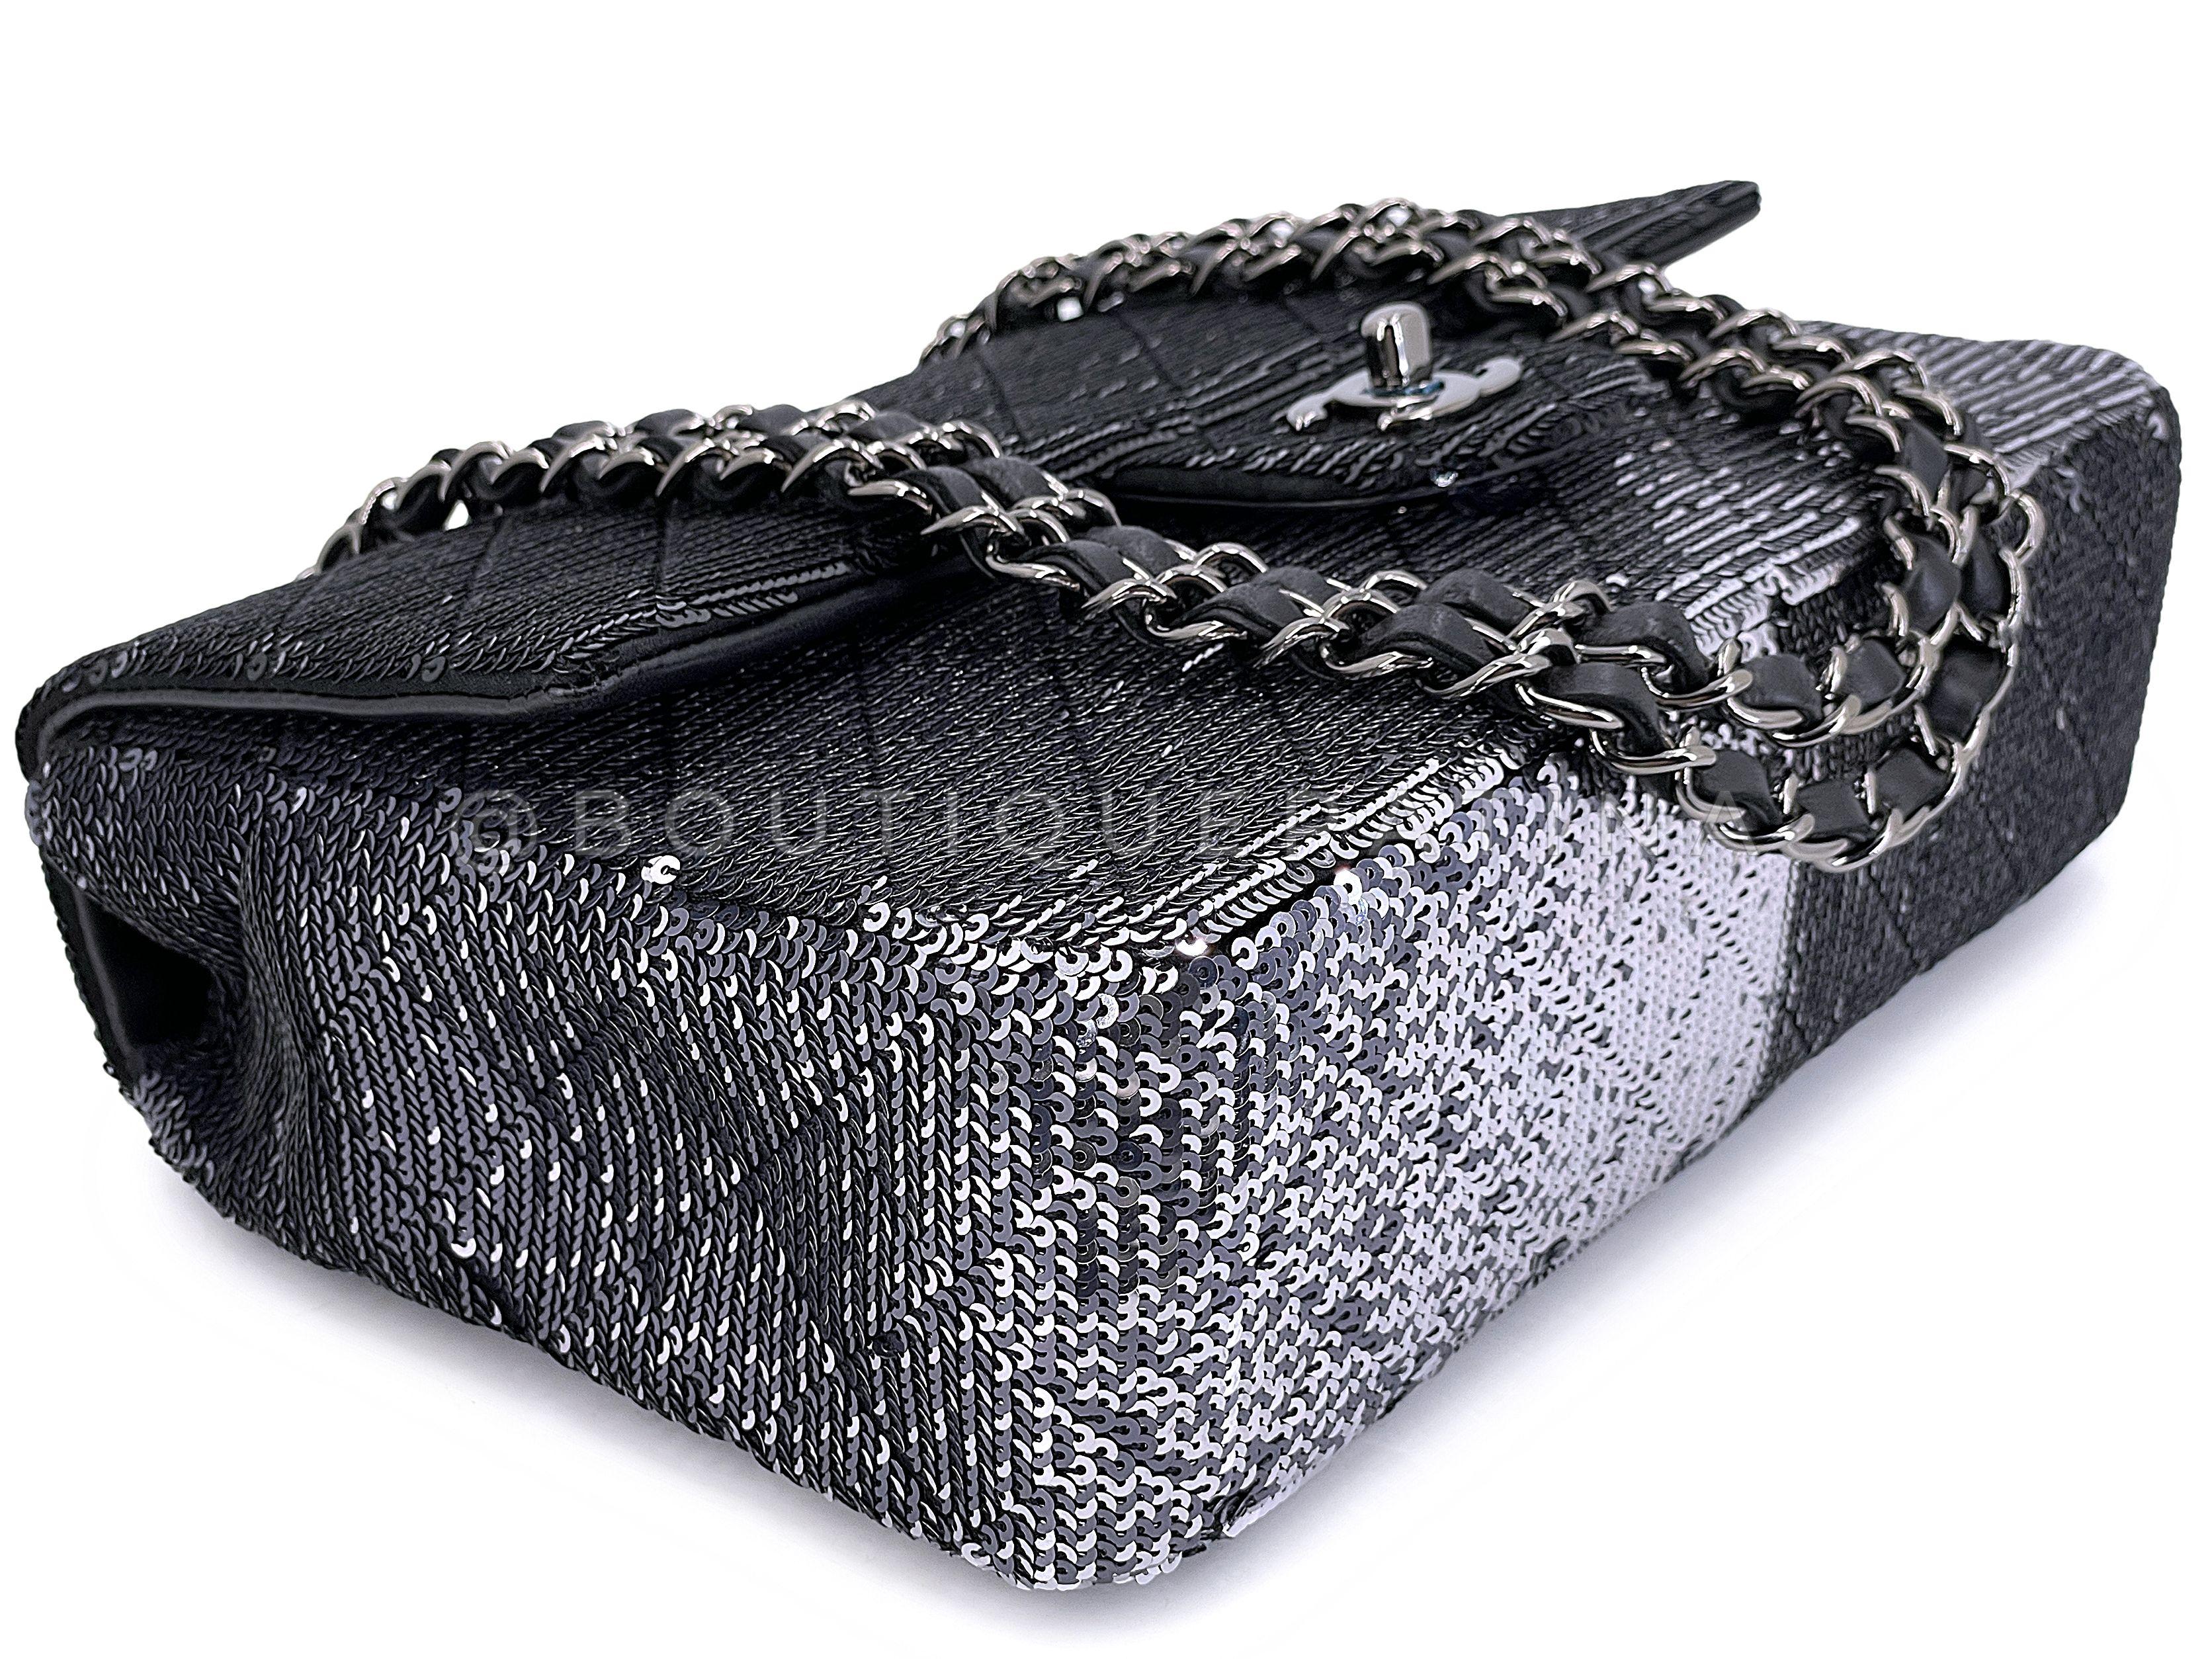 Chanel 2015 Black Silver Quilted Sequin Medium Classic Flap Bag 67572 For Sale 3